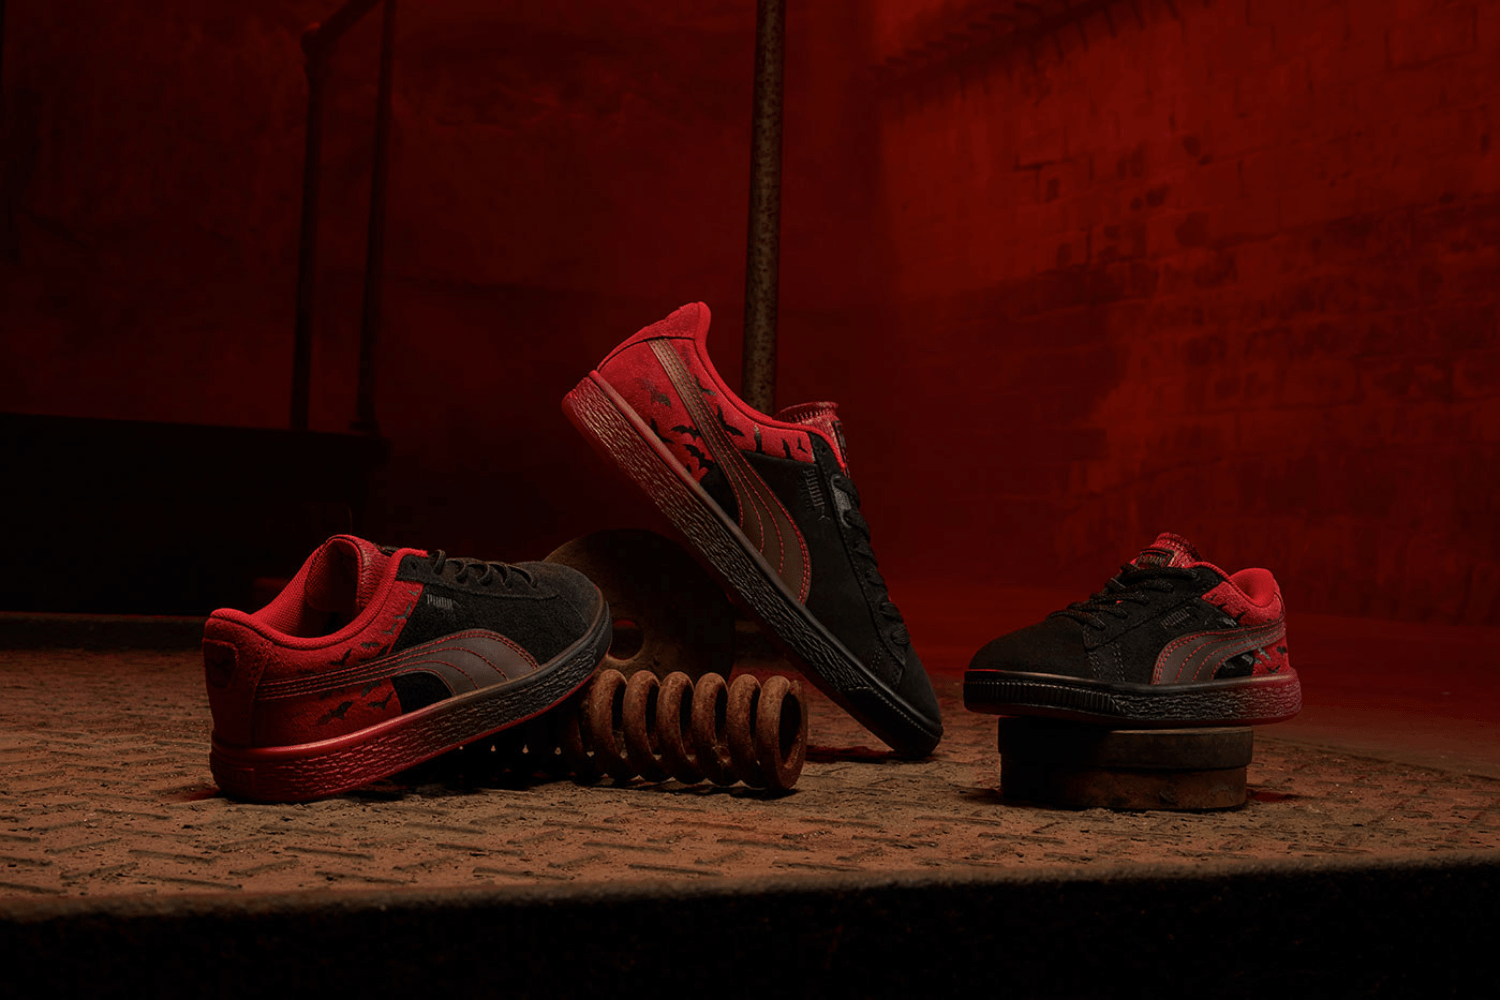 DC Comics and PUMA are launching a limited edition 'The Batman' collection